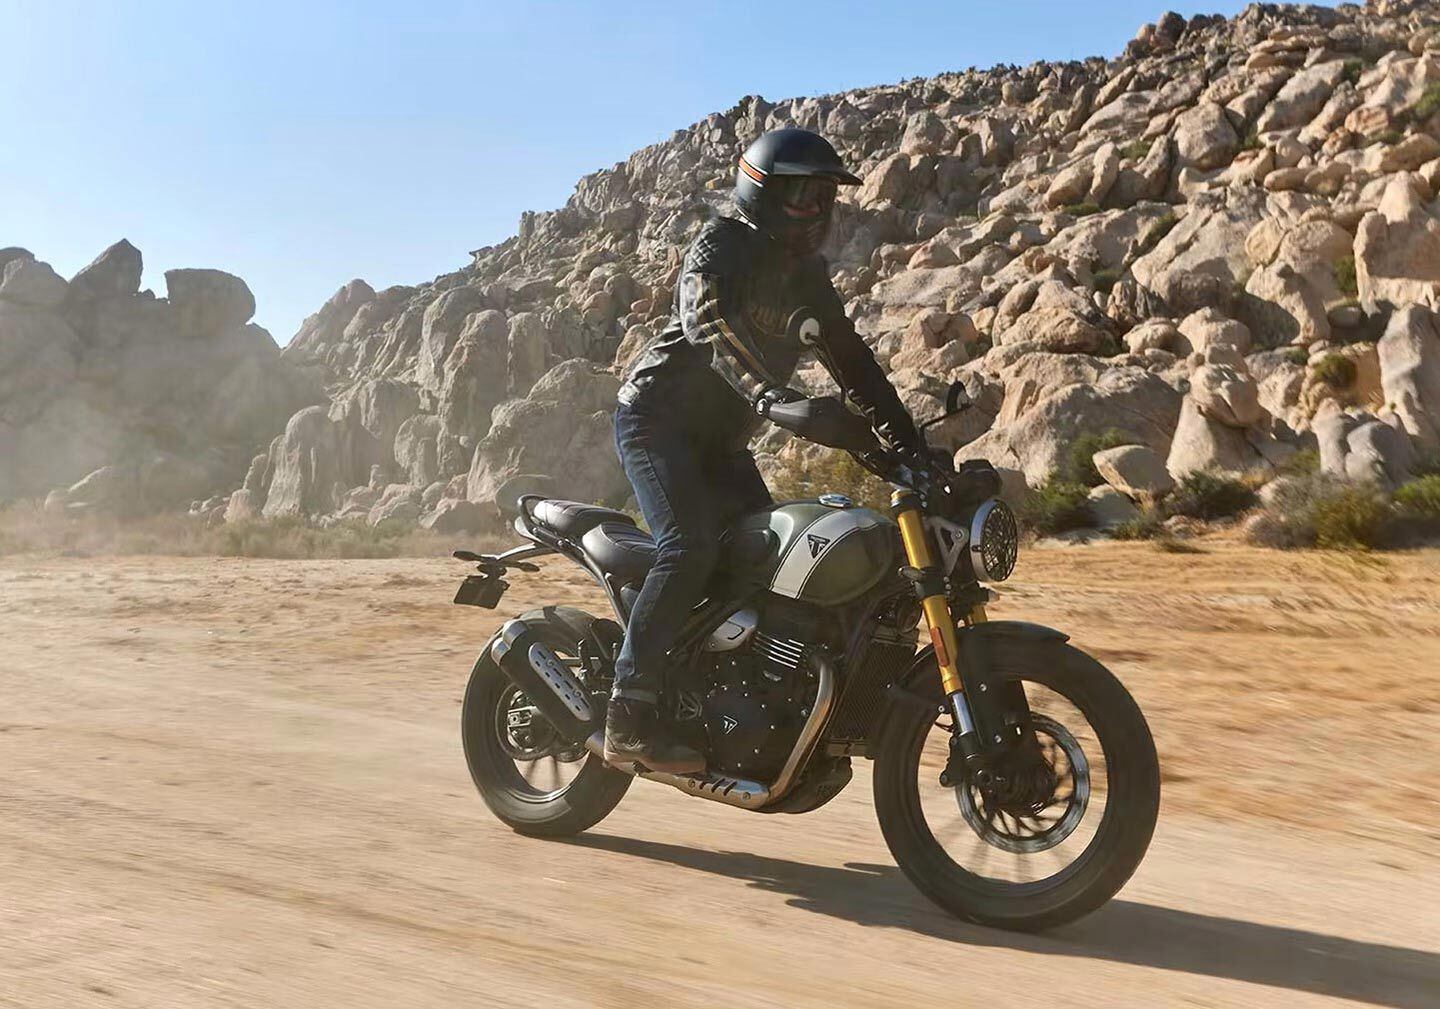 Respectable power-to-weight ratio, off-road capability, and an easy MSRP make the Scrambler 400 X an appealing option for newbs and vets alike. 